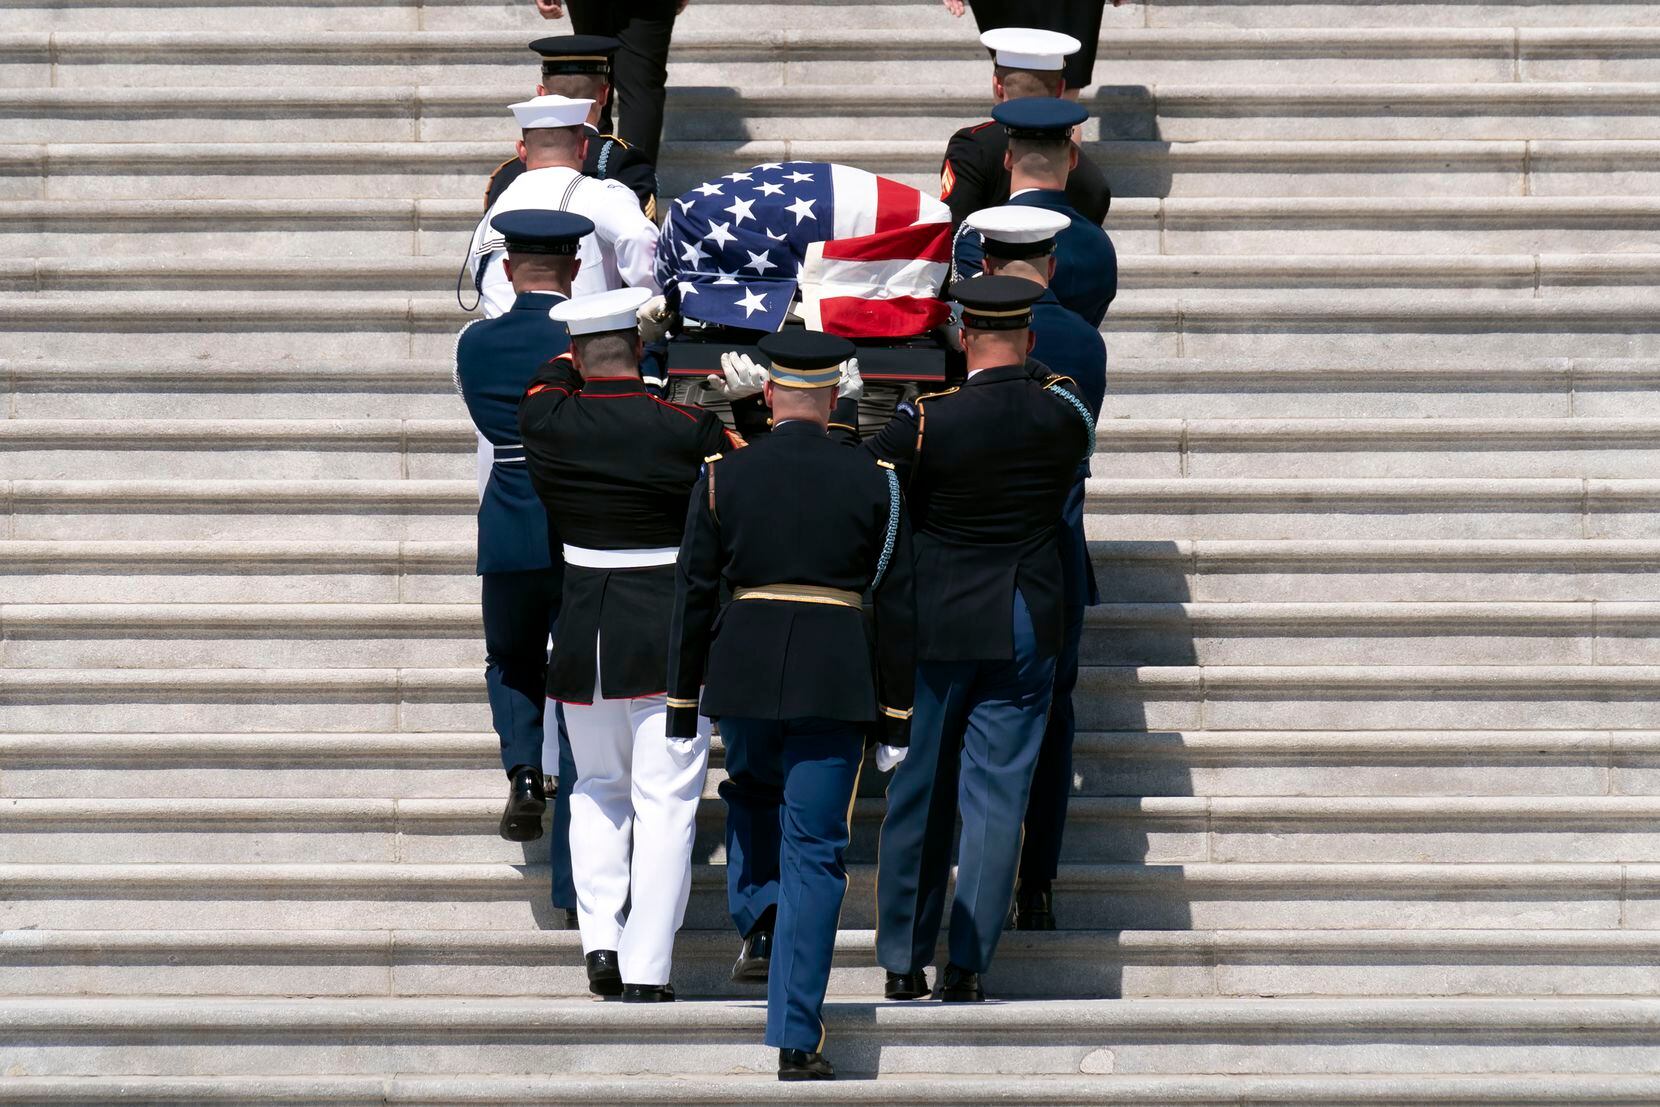 The flag-draped casket bearing the remains of Hershel W. "Woody" Williams is carried by...